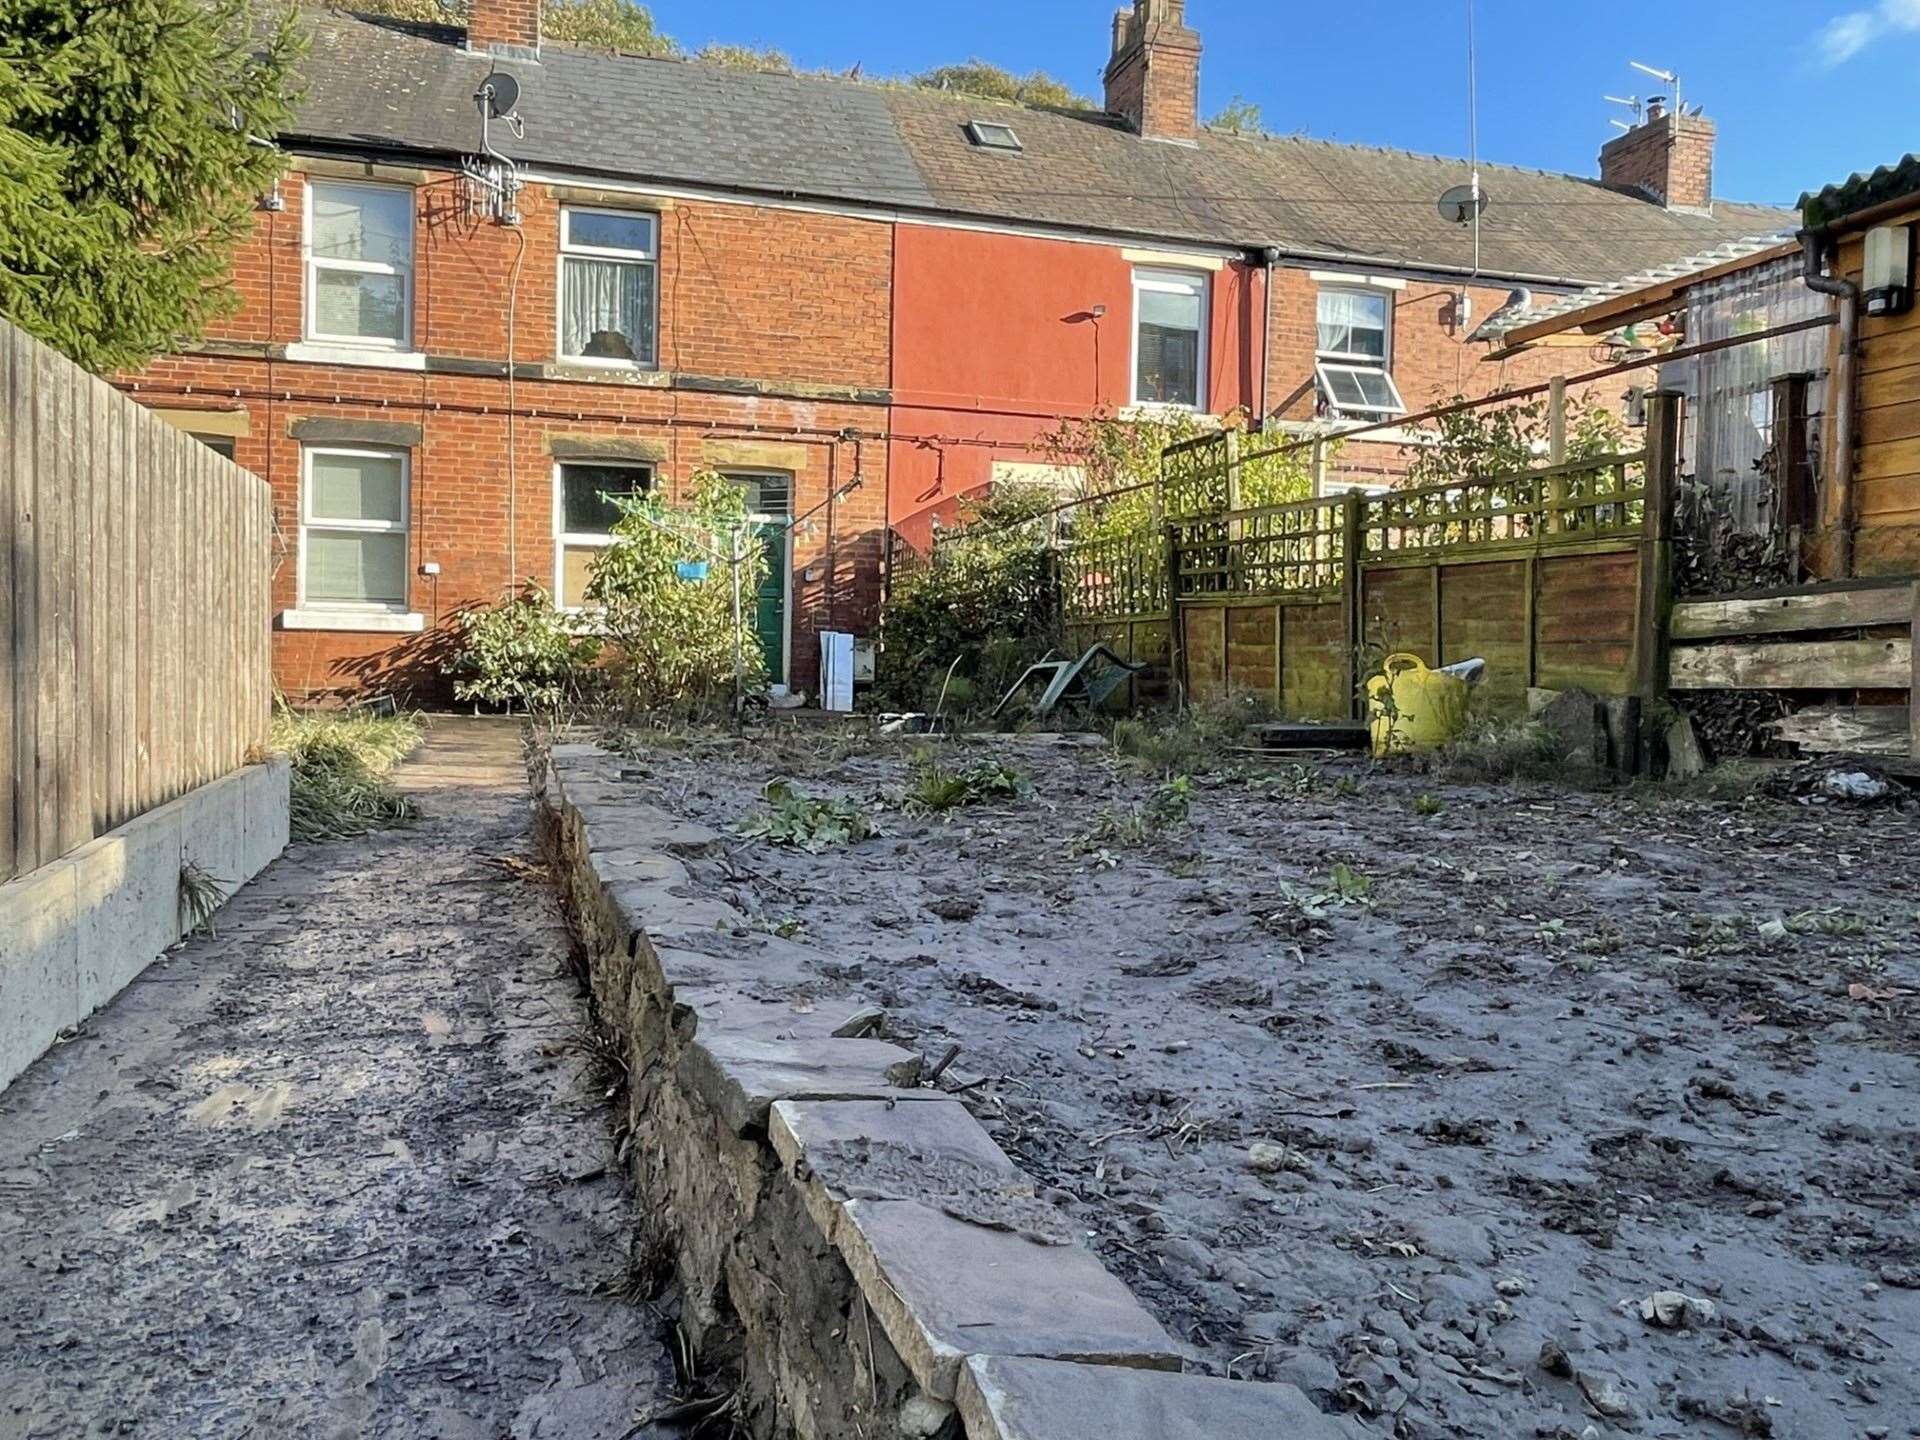 A general view of Tapton Terrace in Chesterfield, Derbyshire, showing the property where Maureen Gilbert, 83, was found dead on Saturday (Matthew Cooper/PA)